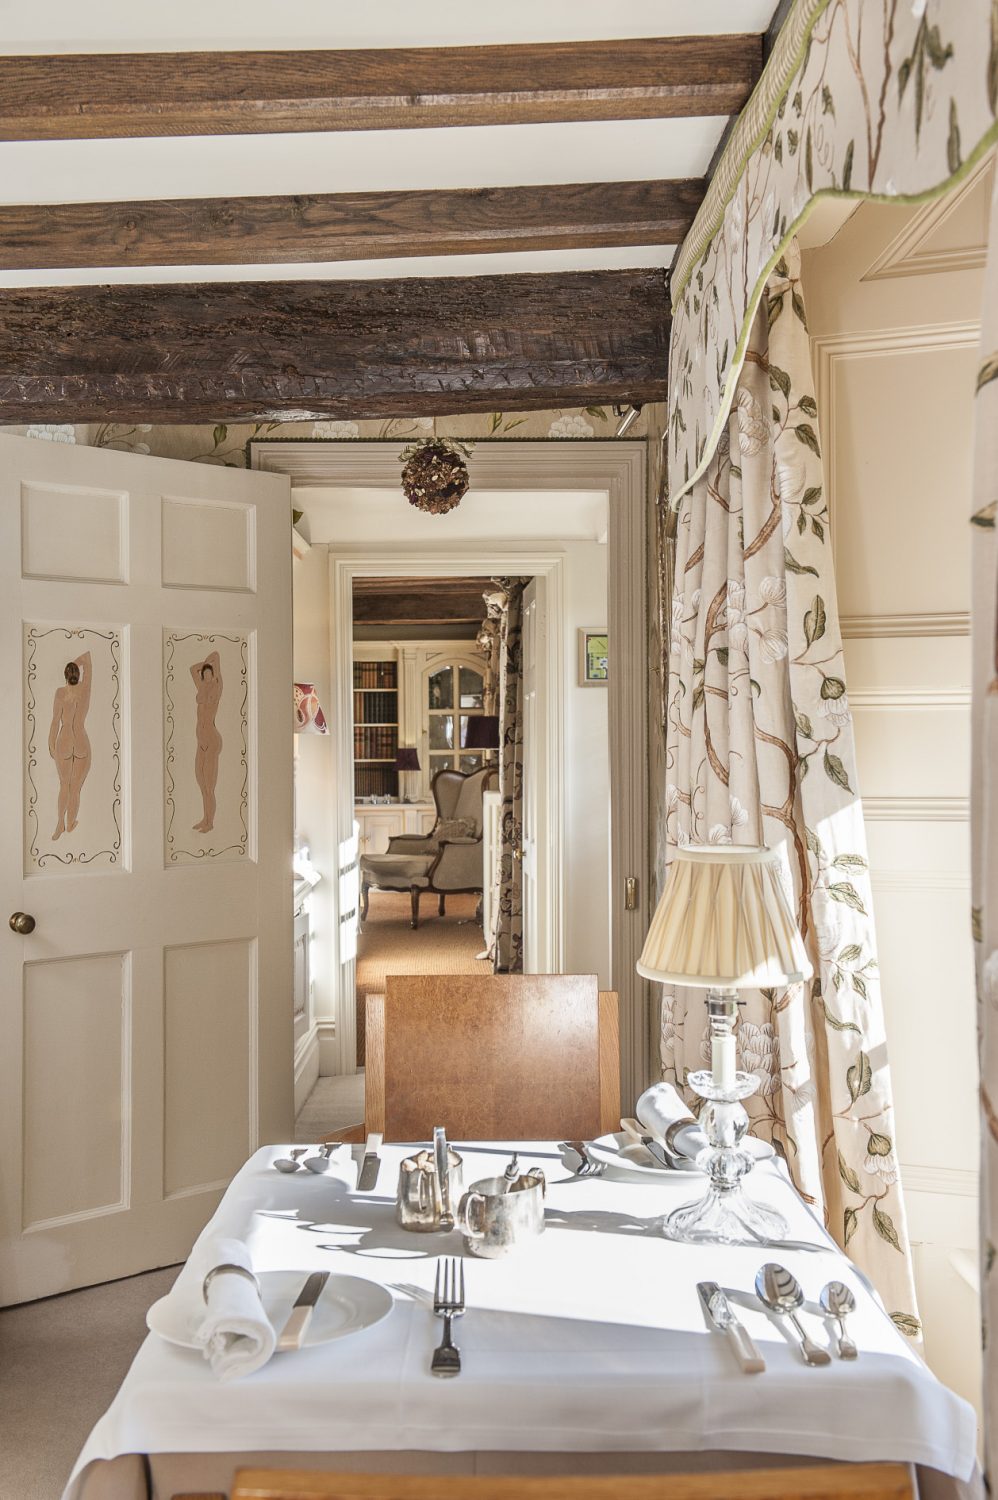 On the doors leading through to the garden and drawing room are two hand-painted nudes, Nina’s tribute to Charleston